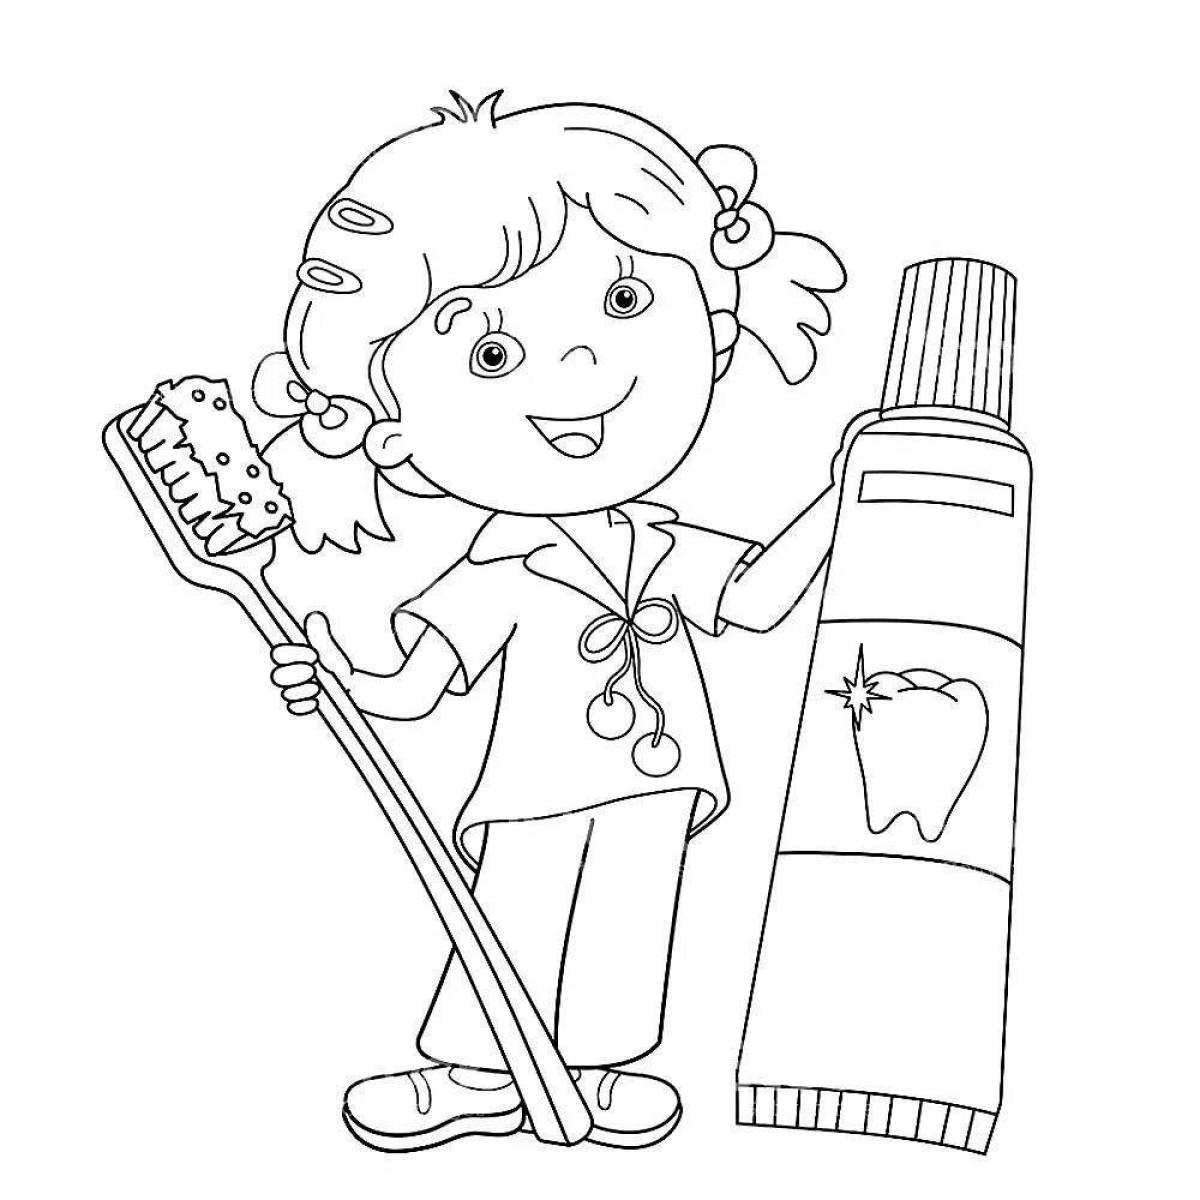 Inspirational coloring book about healthy hygiene